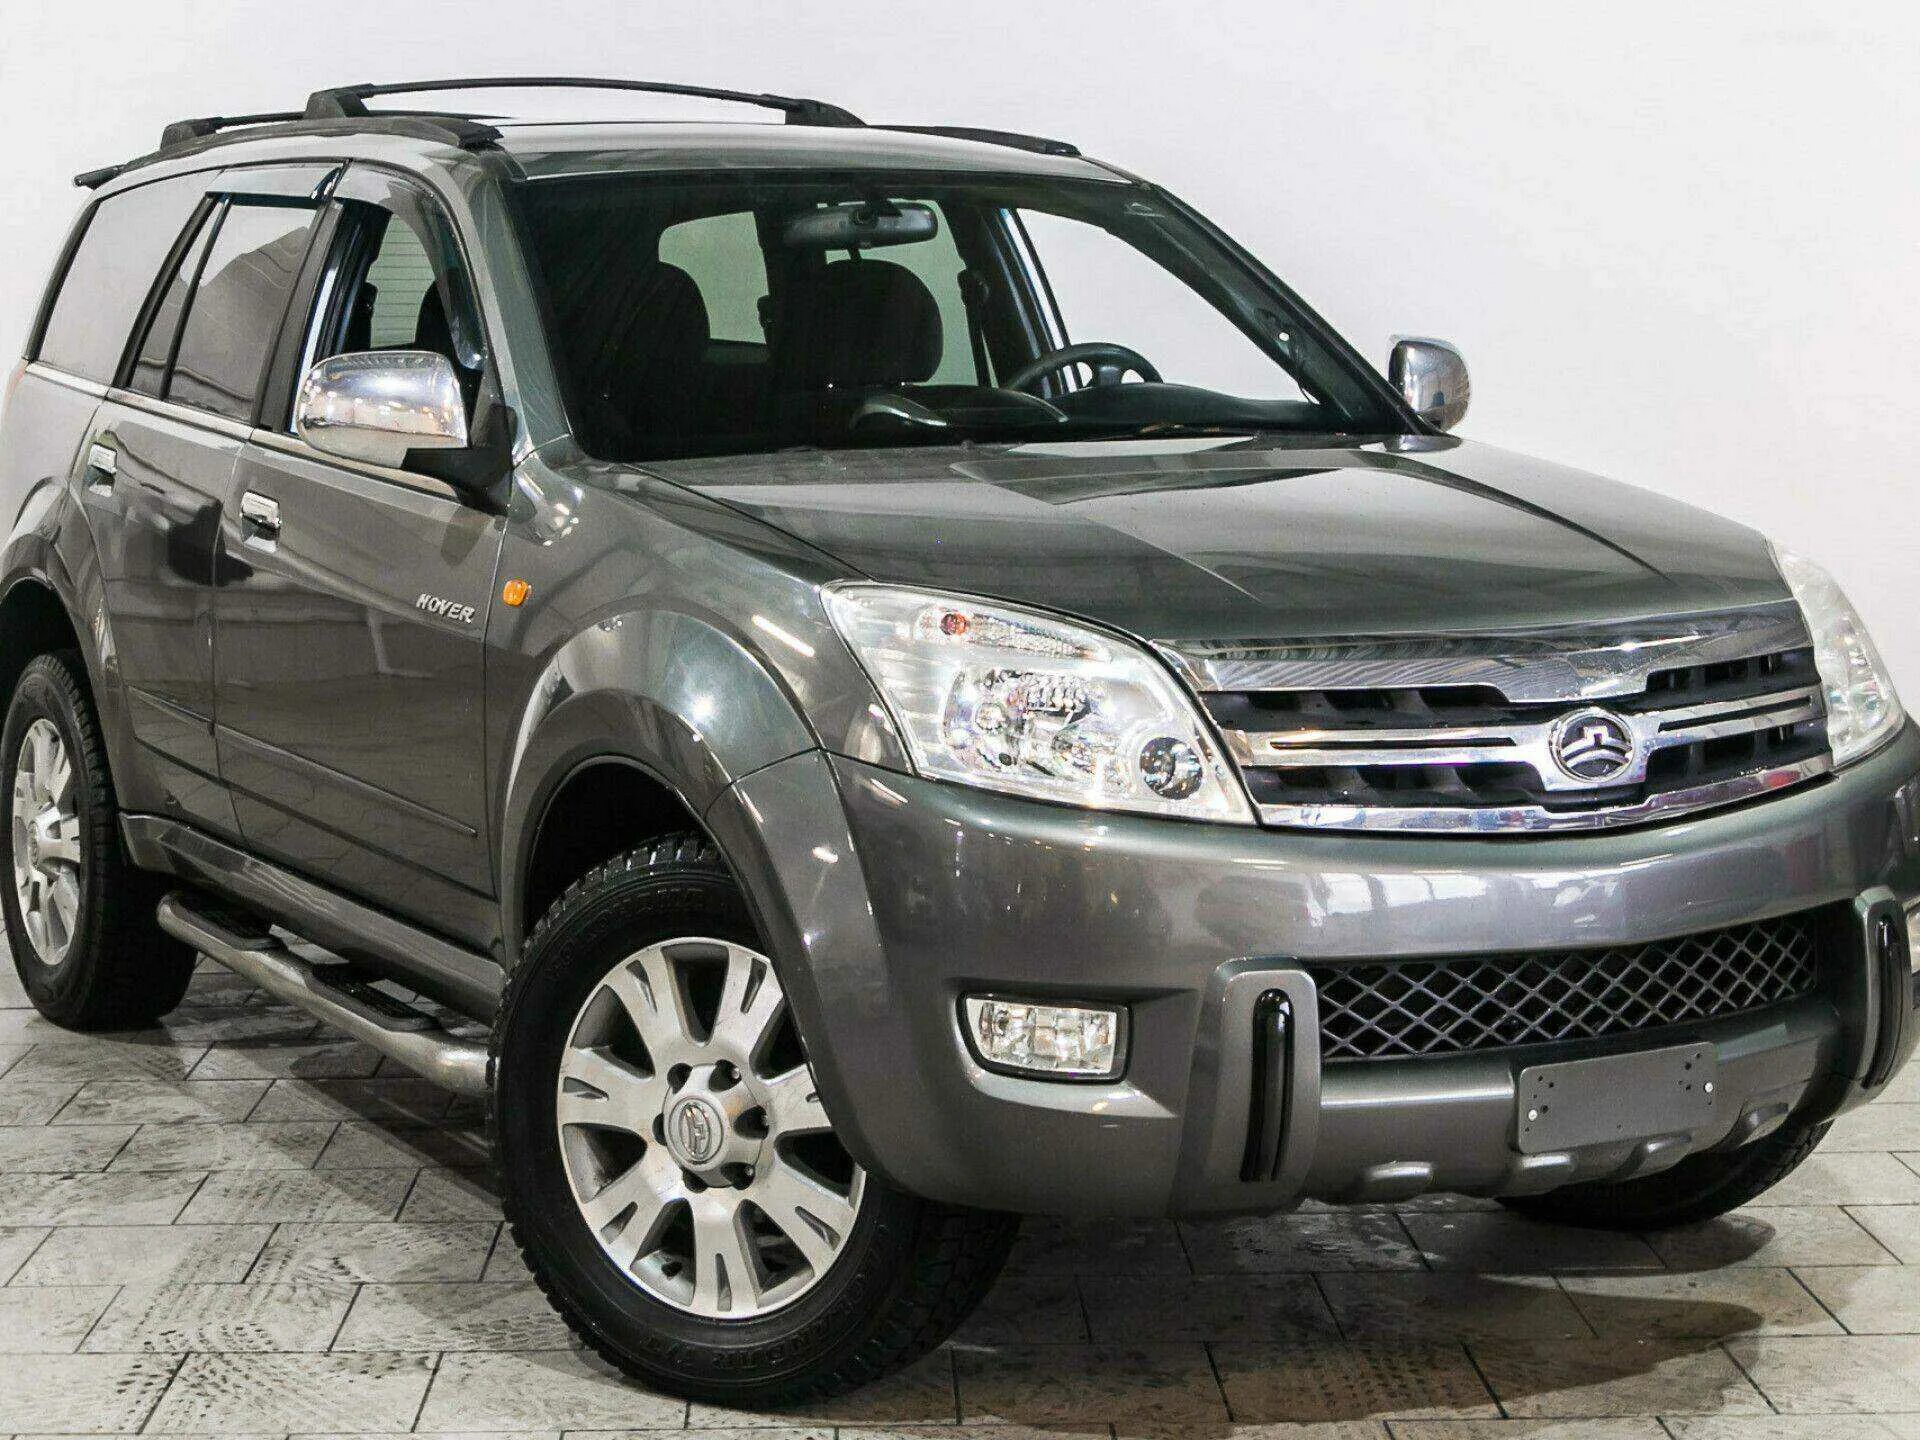 Ховер 1. Great Wall Hover 2008. Great Wall Hover 2005. Great Wall Hover 2.4 МТ 2008. Great Wall 2008.